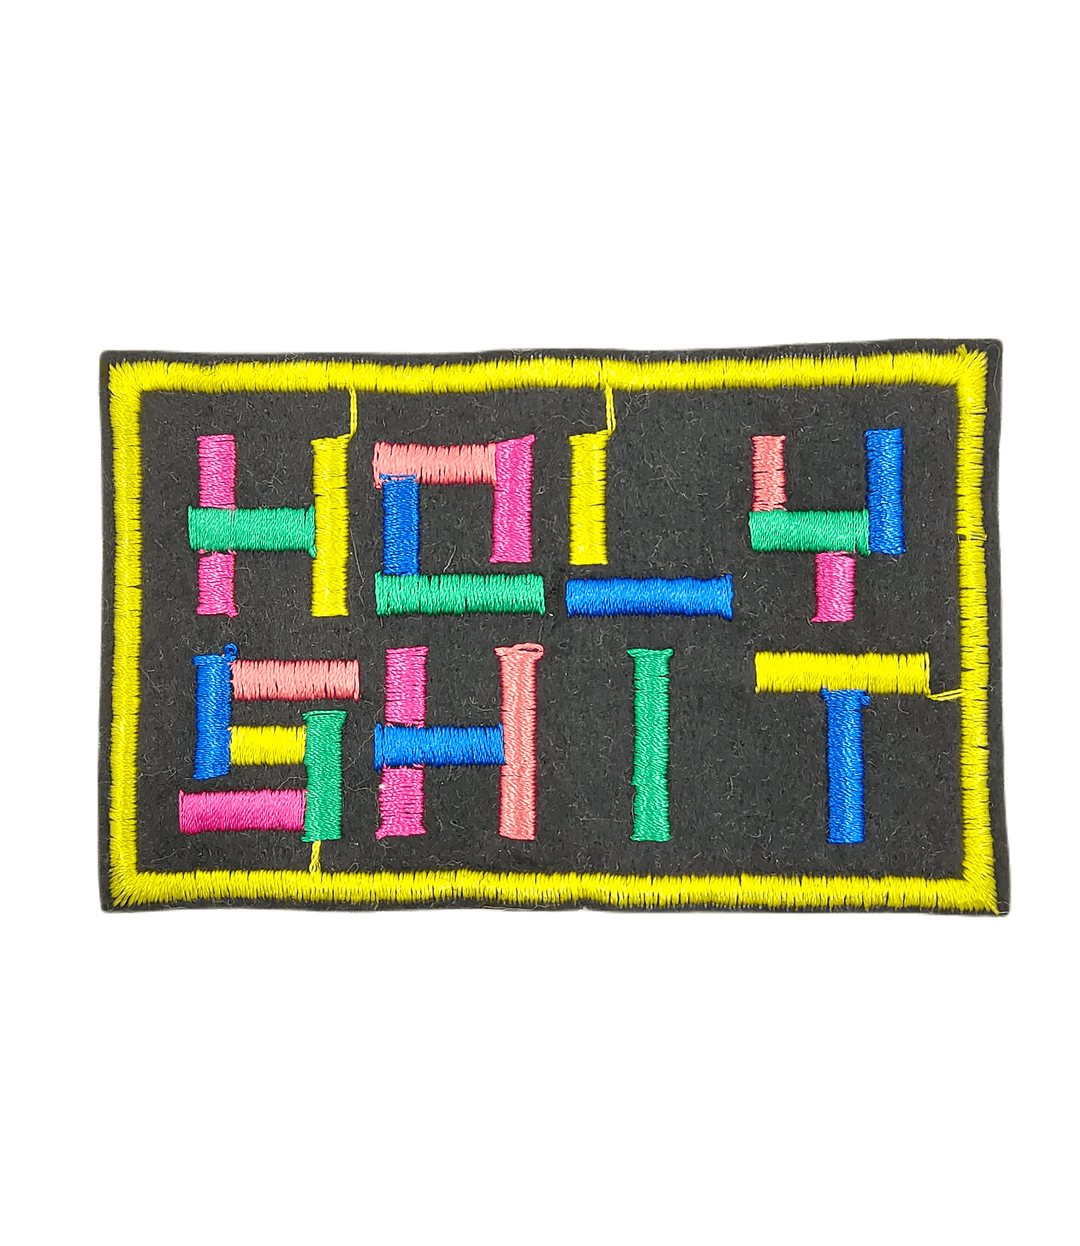 patch, best patches, embroidered patch, quality patch, premium quality patch, premium patches